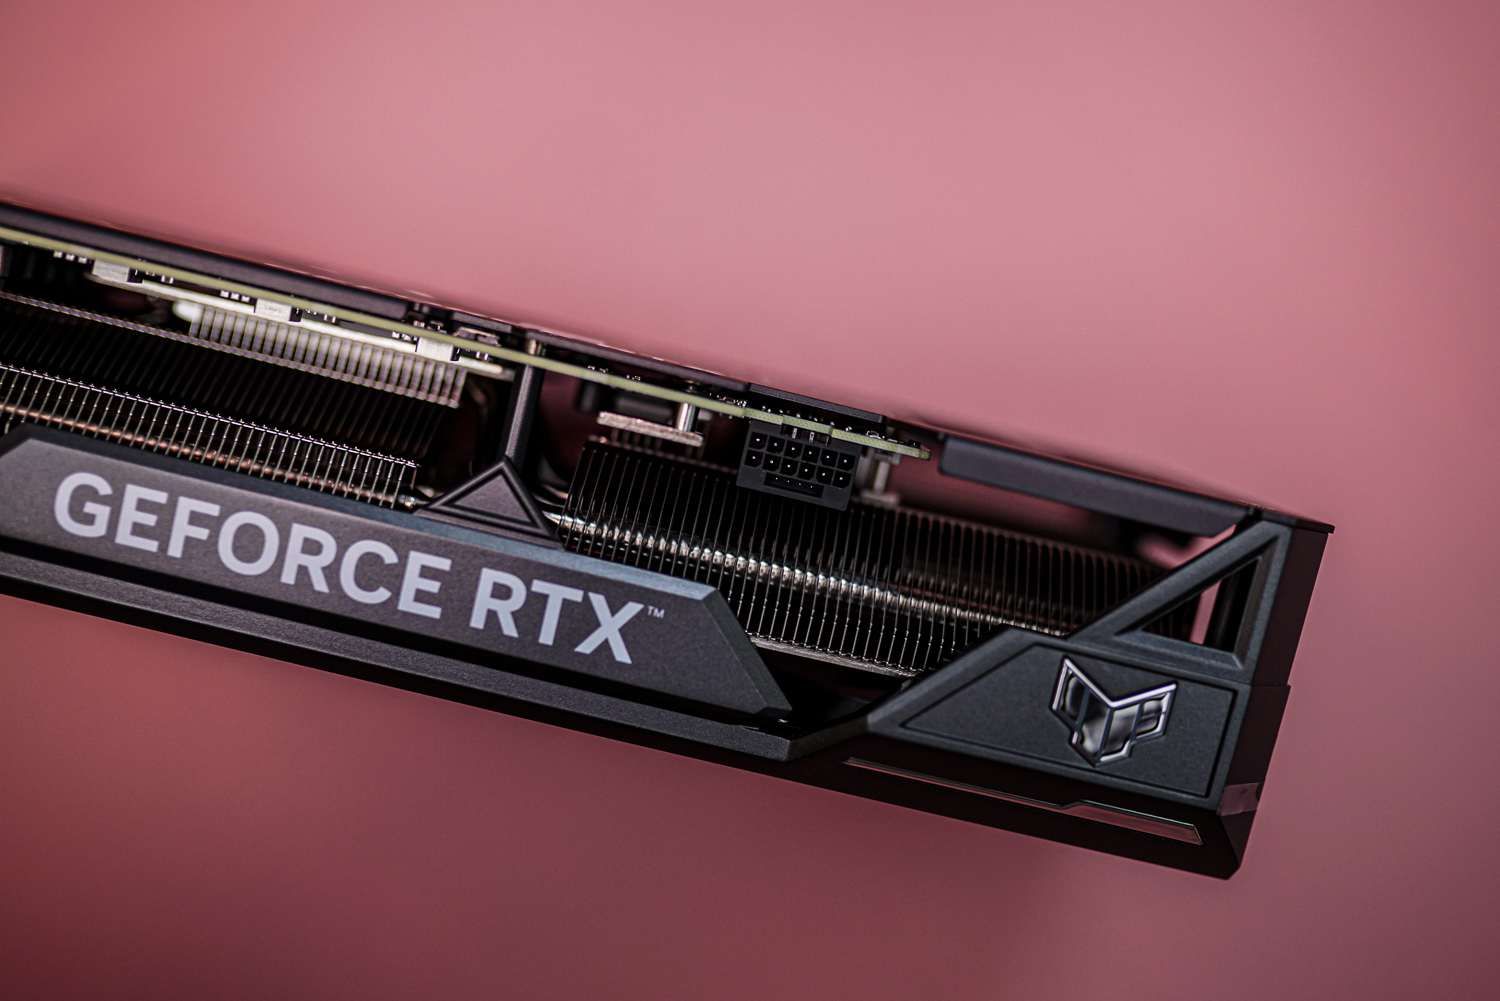 Nvidia RTX 4070 Ti Super review: the awkward middle child